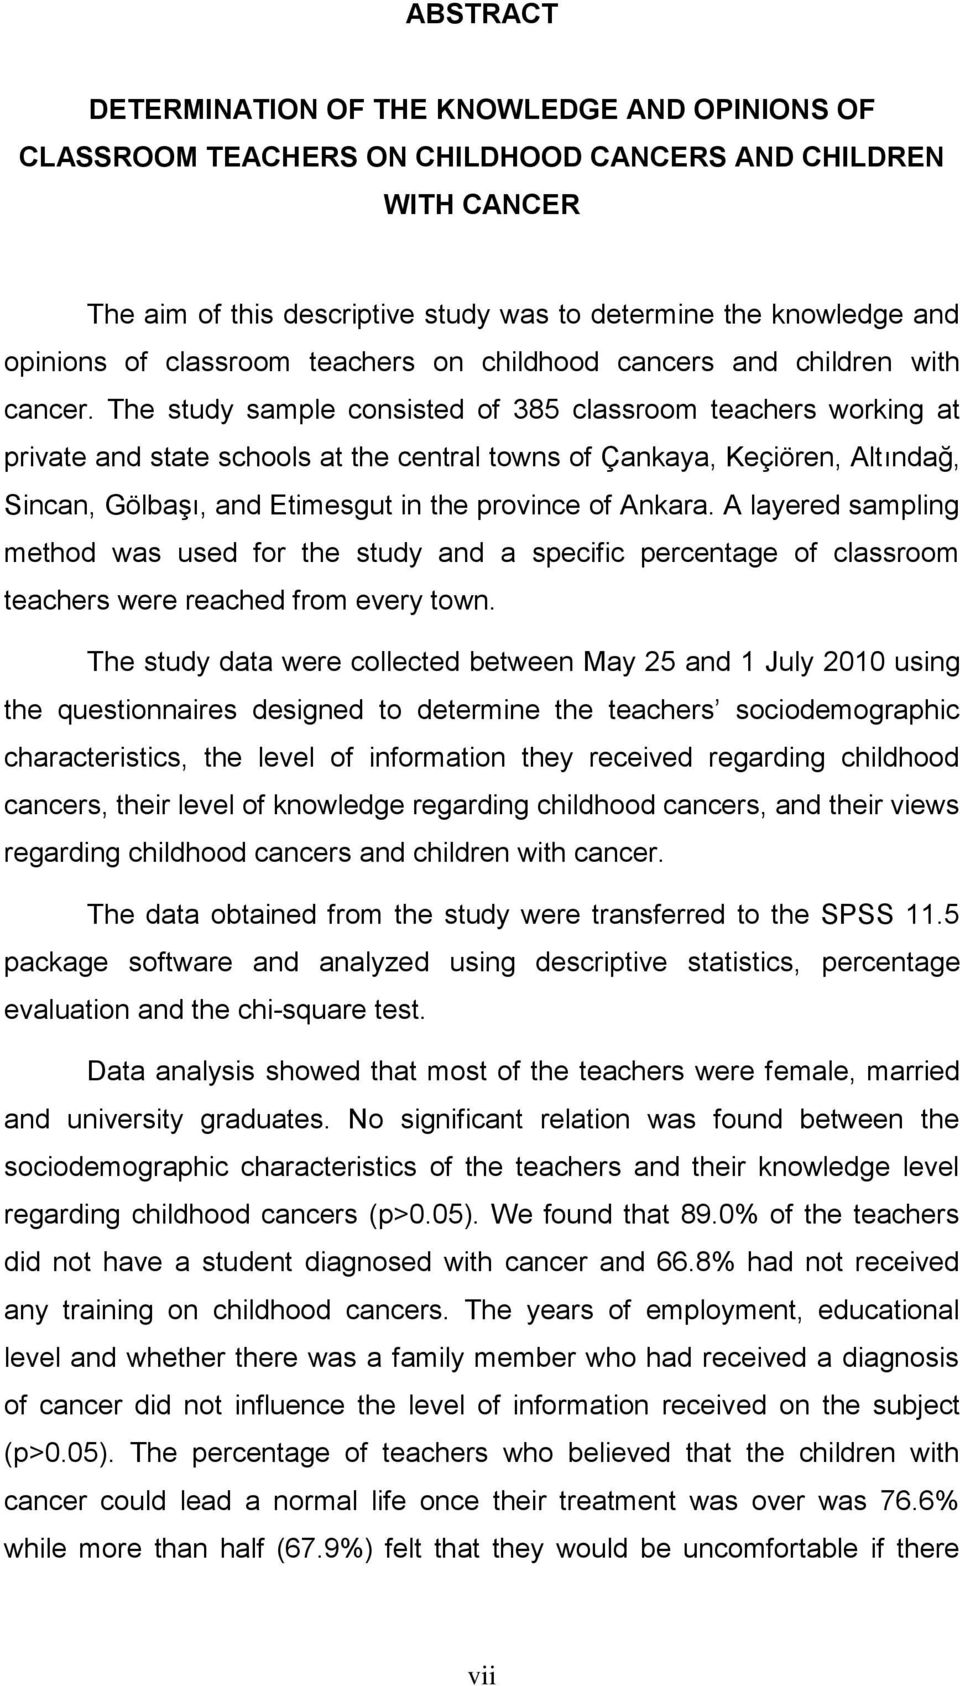 The study sample consisted of 385 classroom teachers working at private and state schools at the central towns of Çankaya, Keçiören, Altındağ, Sincan, Gölbaşı, and Etimesgut in the province of Ankara.